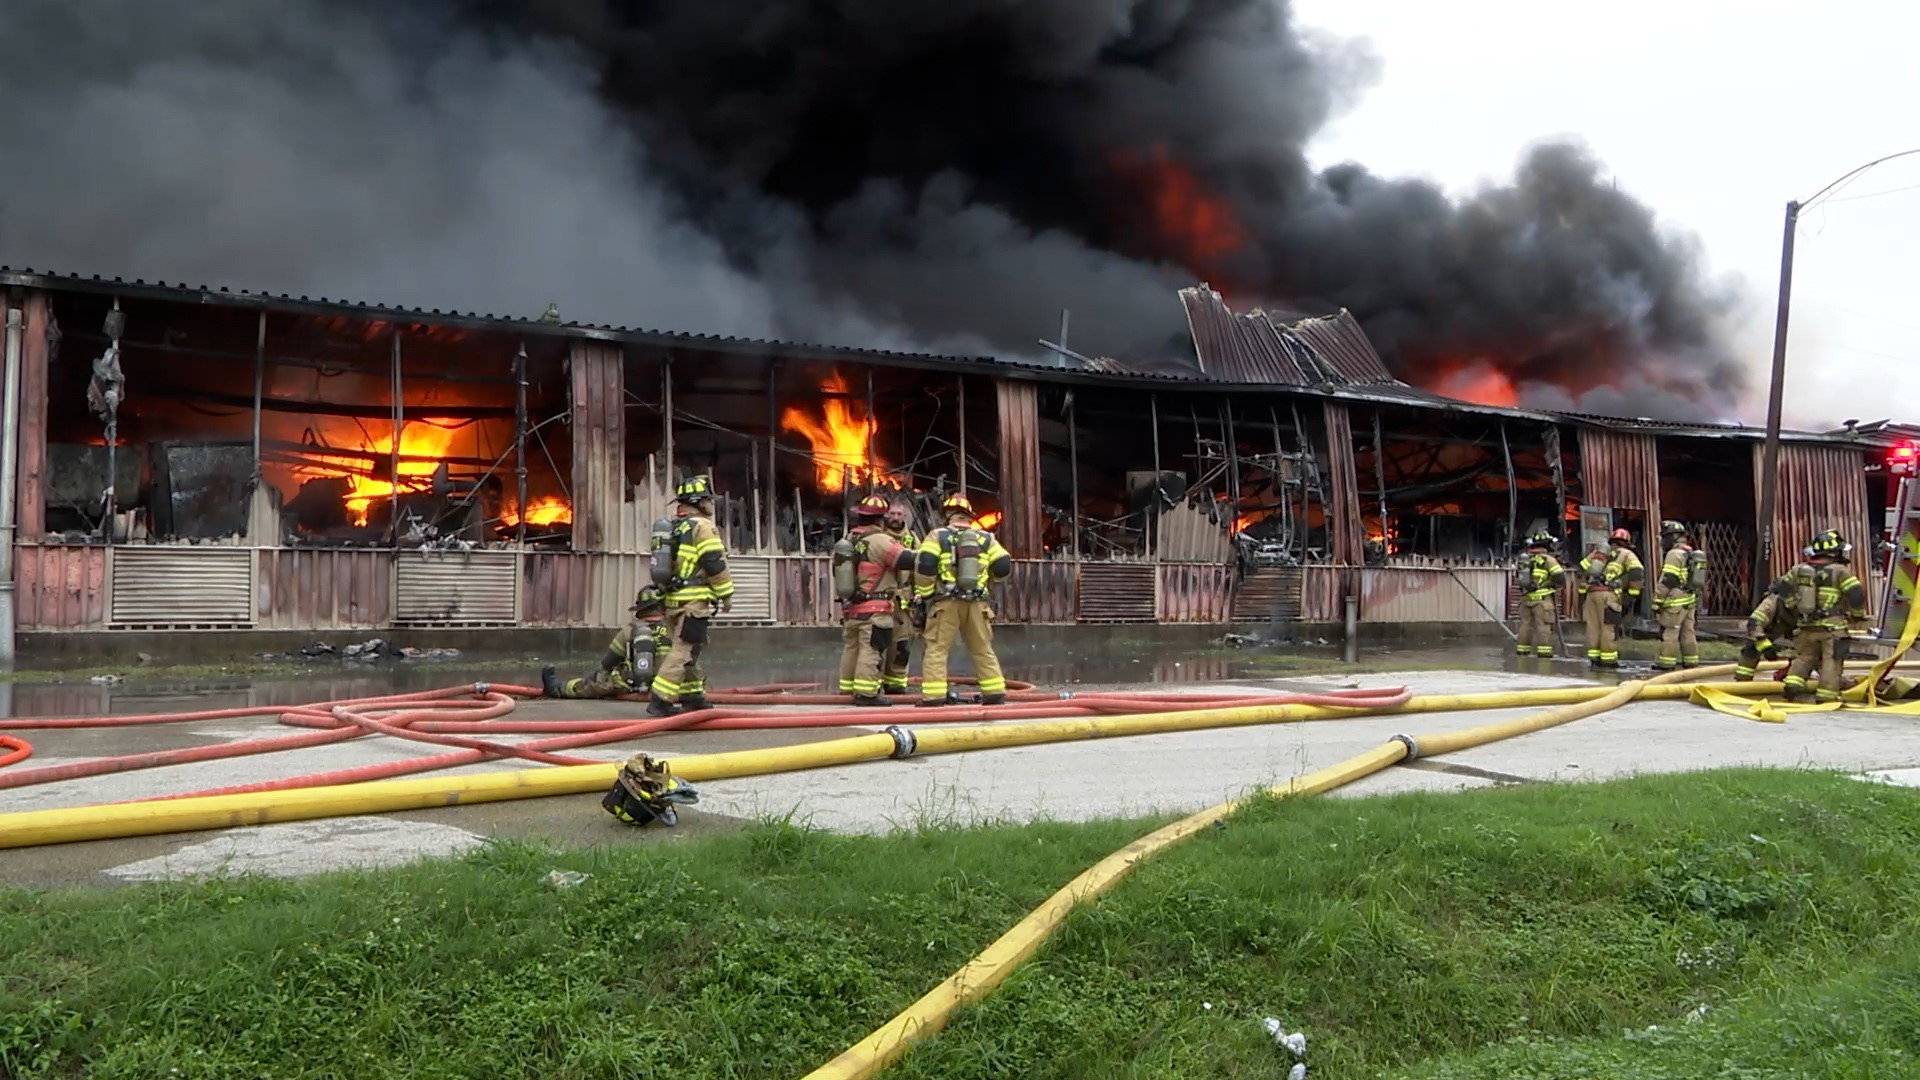 The Houston Fire Department said crews are working to put out a warehouse fire north of downtown Saturday morning.